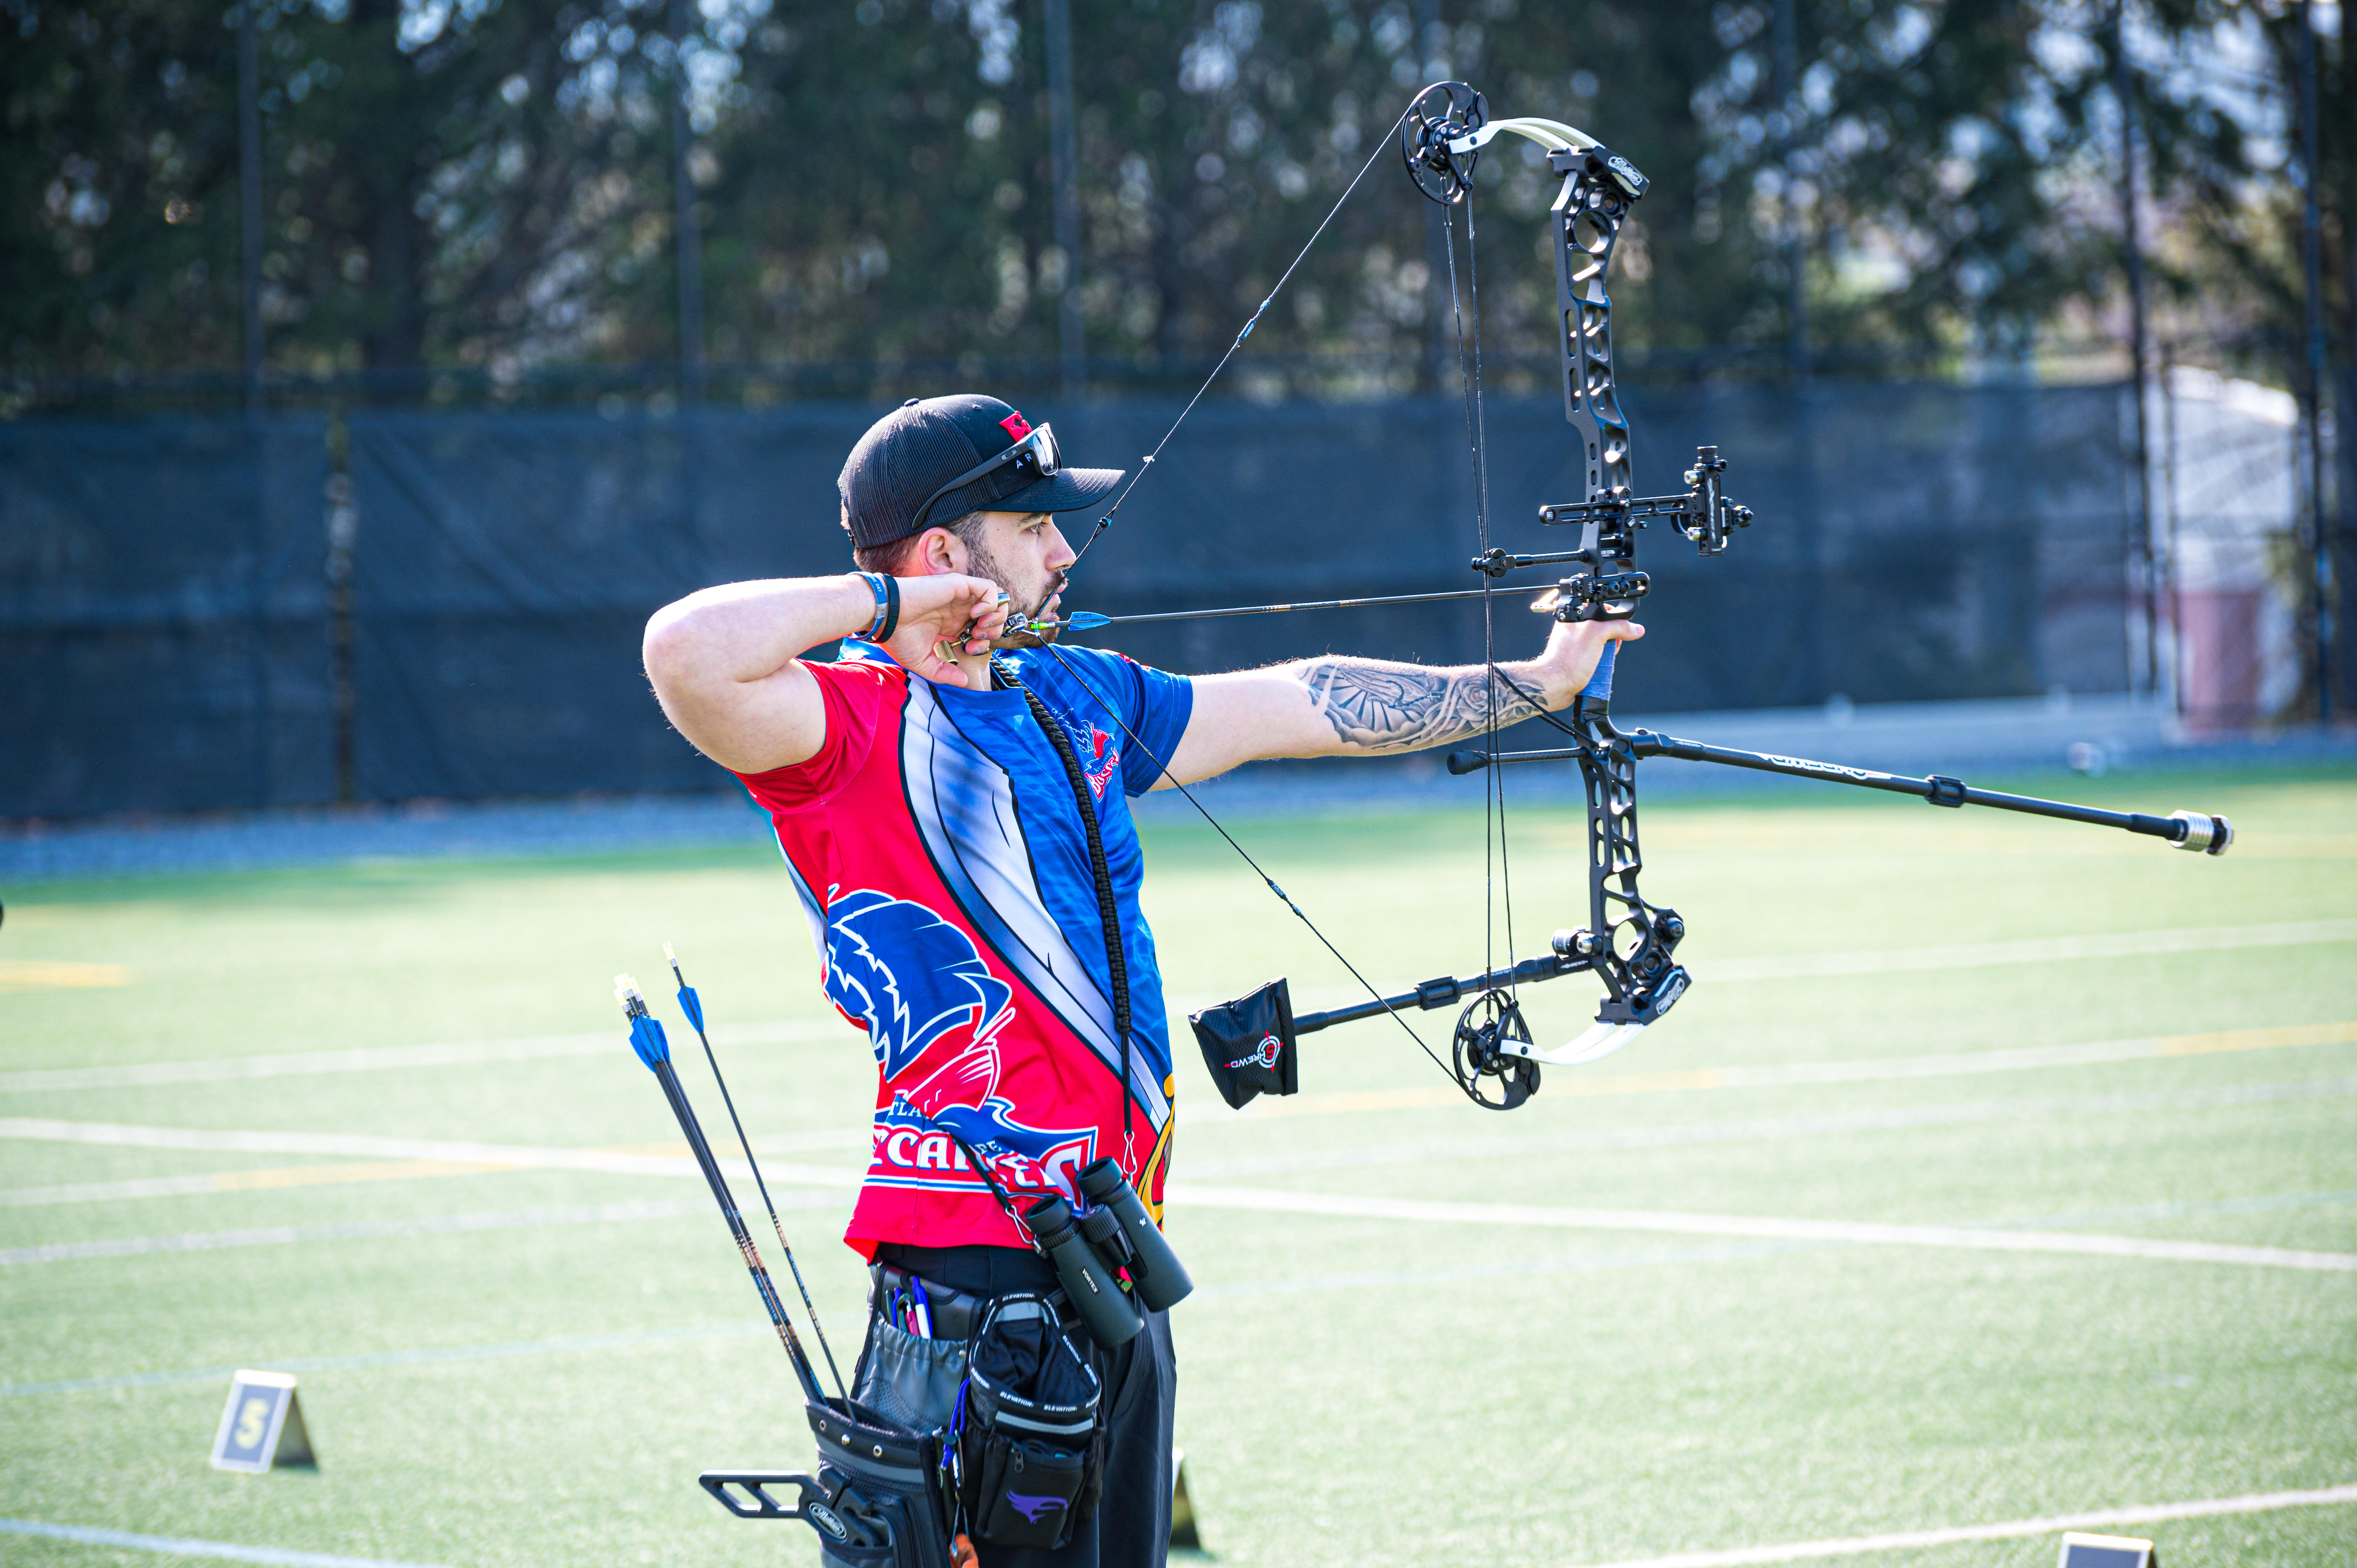 Atlantic Cape archer Matthew Byrnes competes at the 2022 USA Archery Collegiate Target Regionals-East Region at James Madison University April 23 and 24 in Virginia.